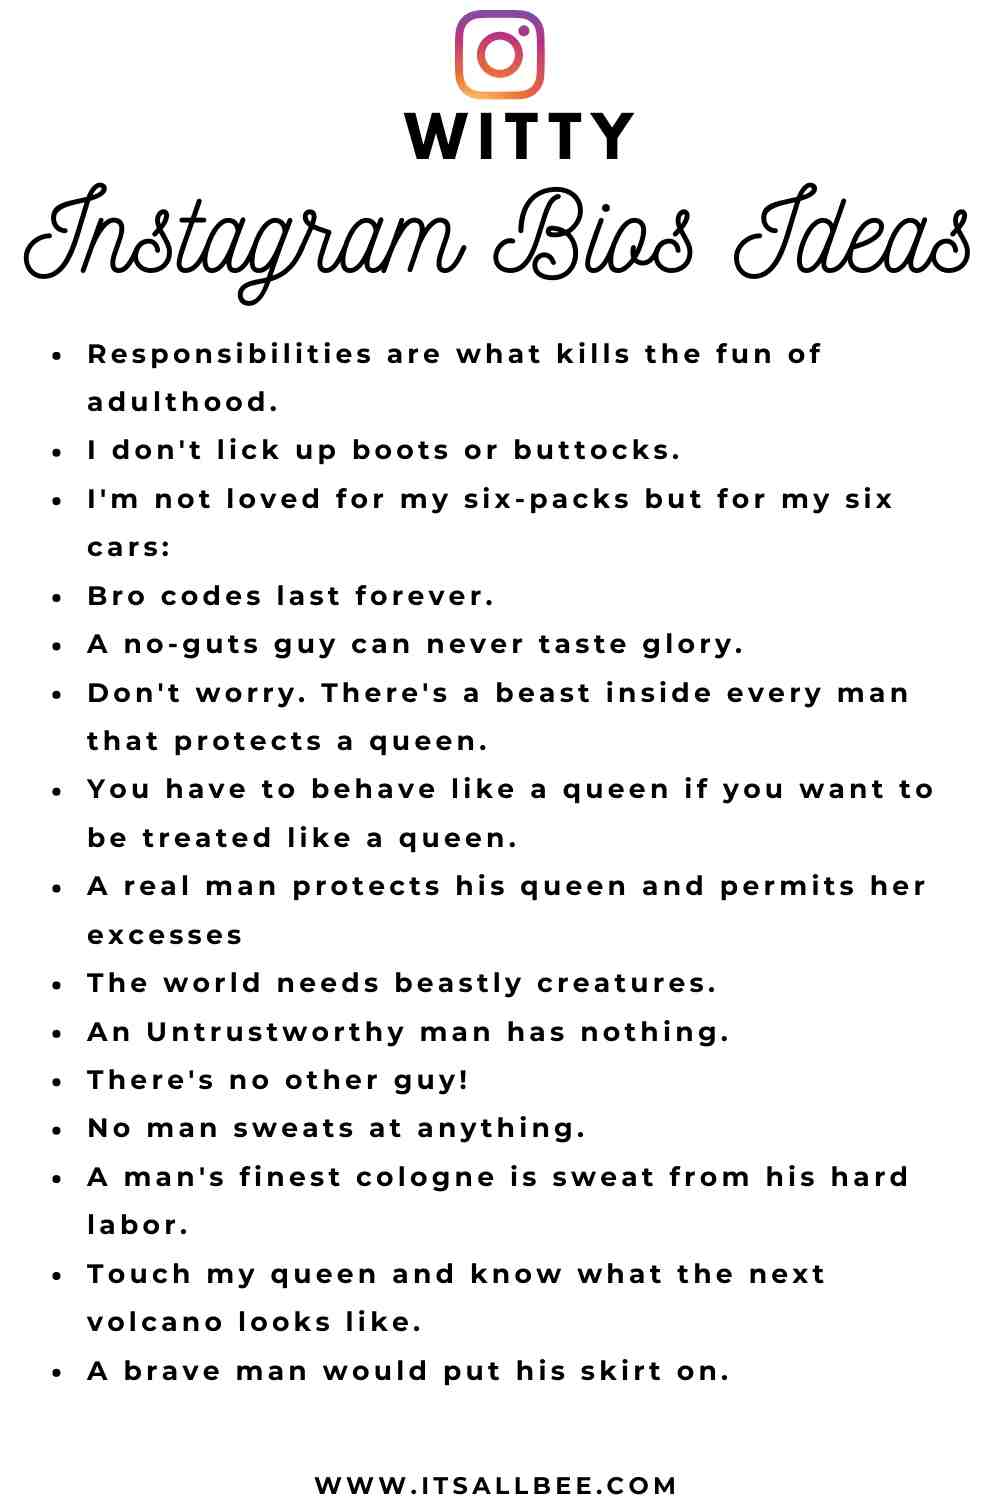 150 Quotes Captions Ideas For Instagram Bios For Guys